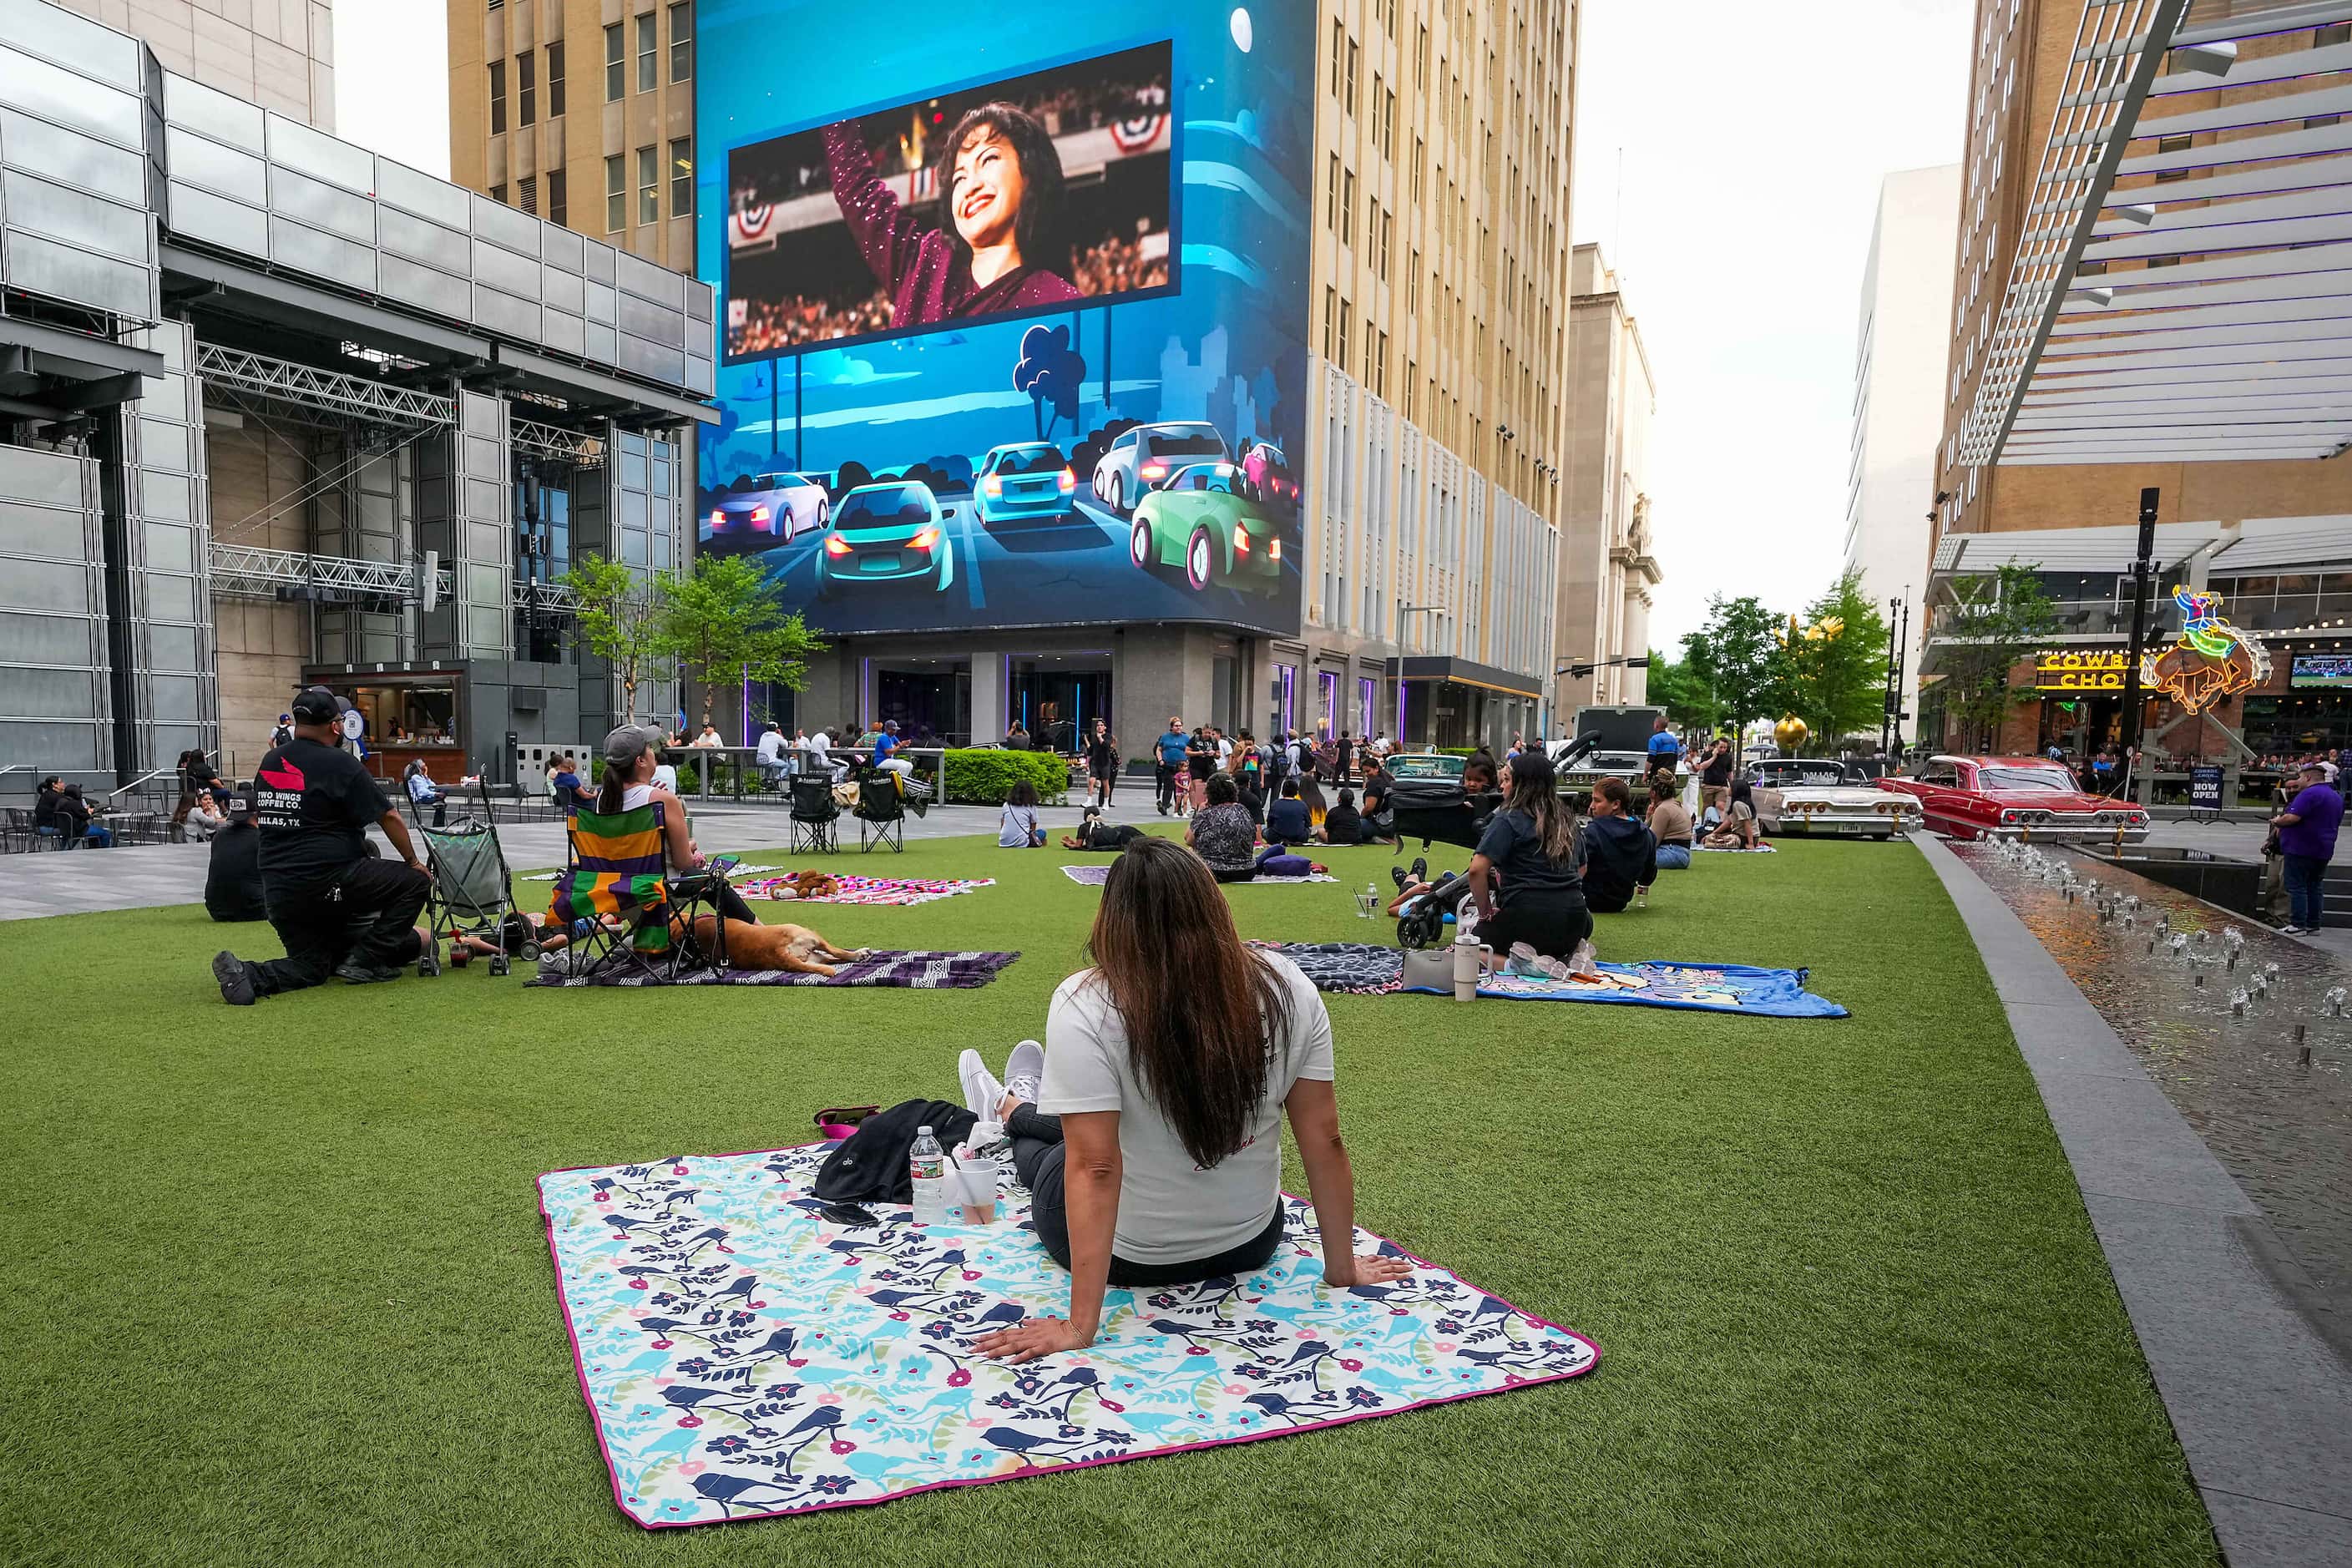 People spread out on the lawn to watch a  screening of the 1997 film starring Jennifer Lopez...